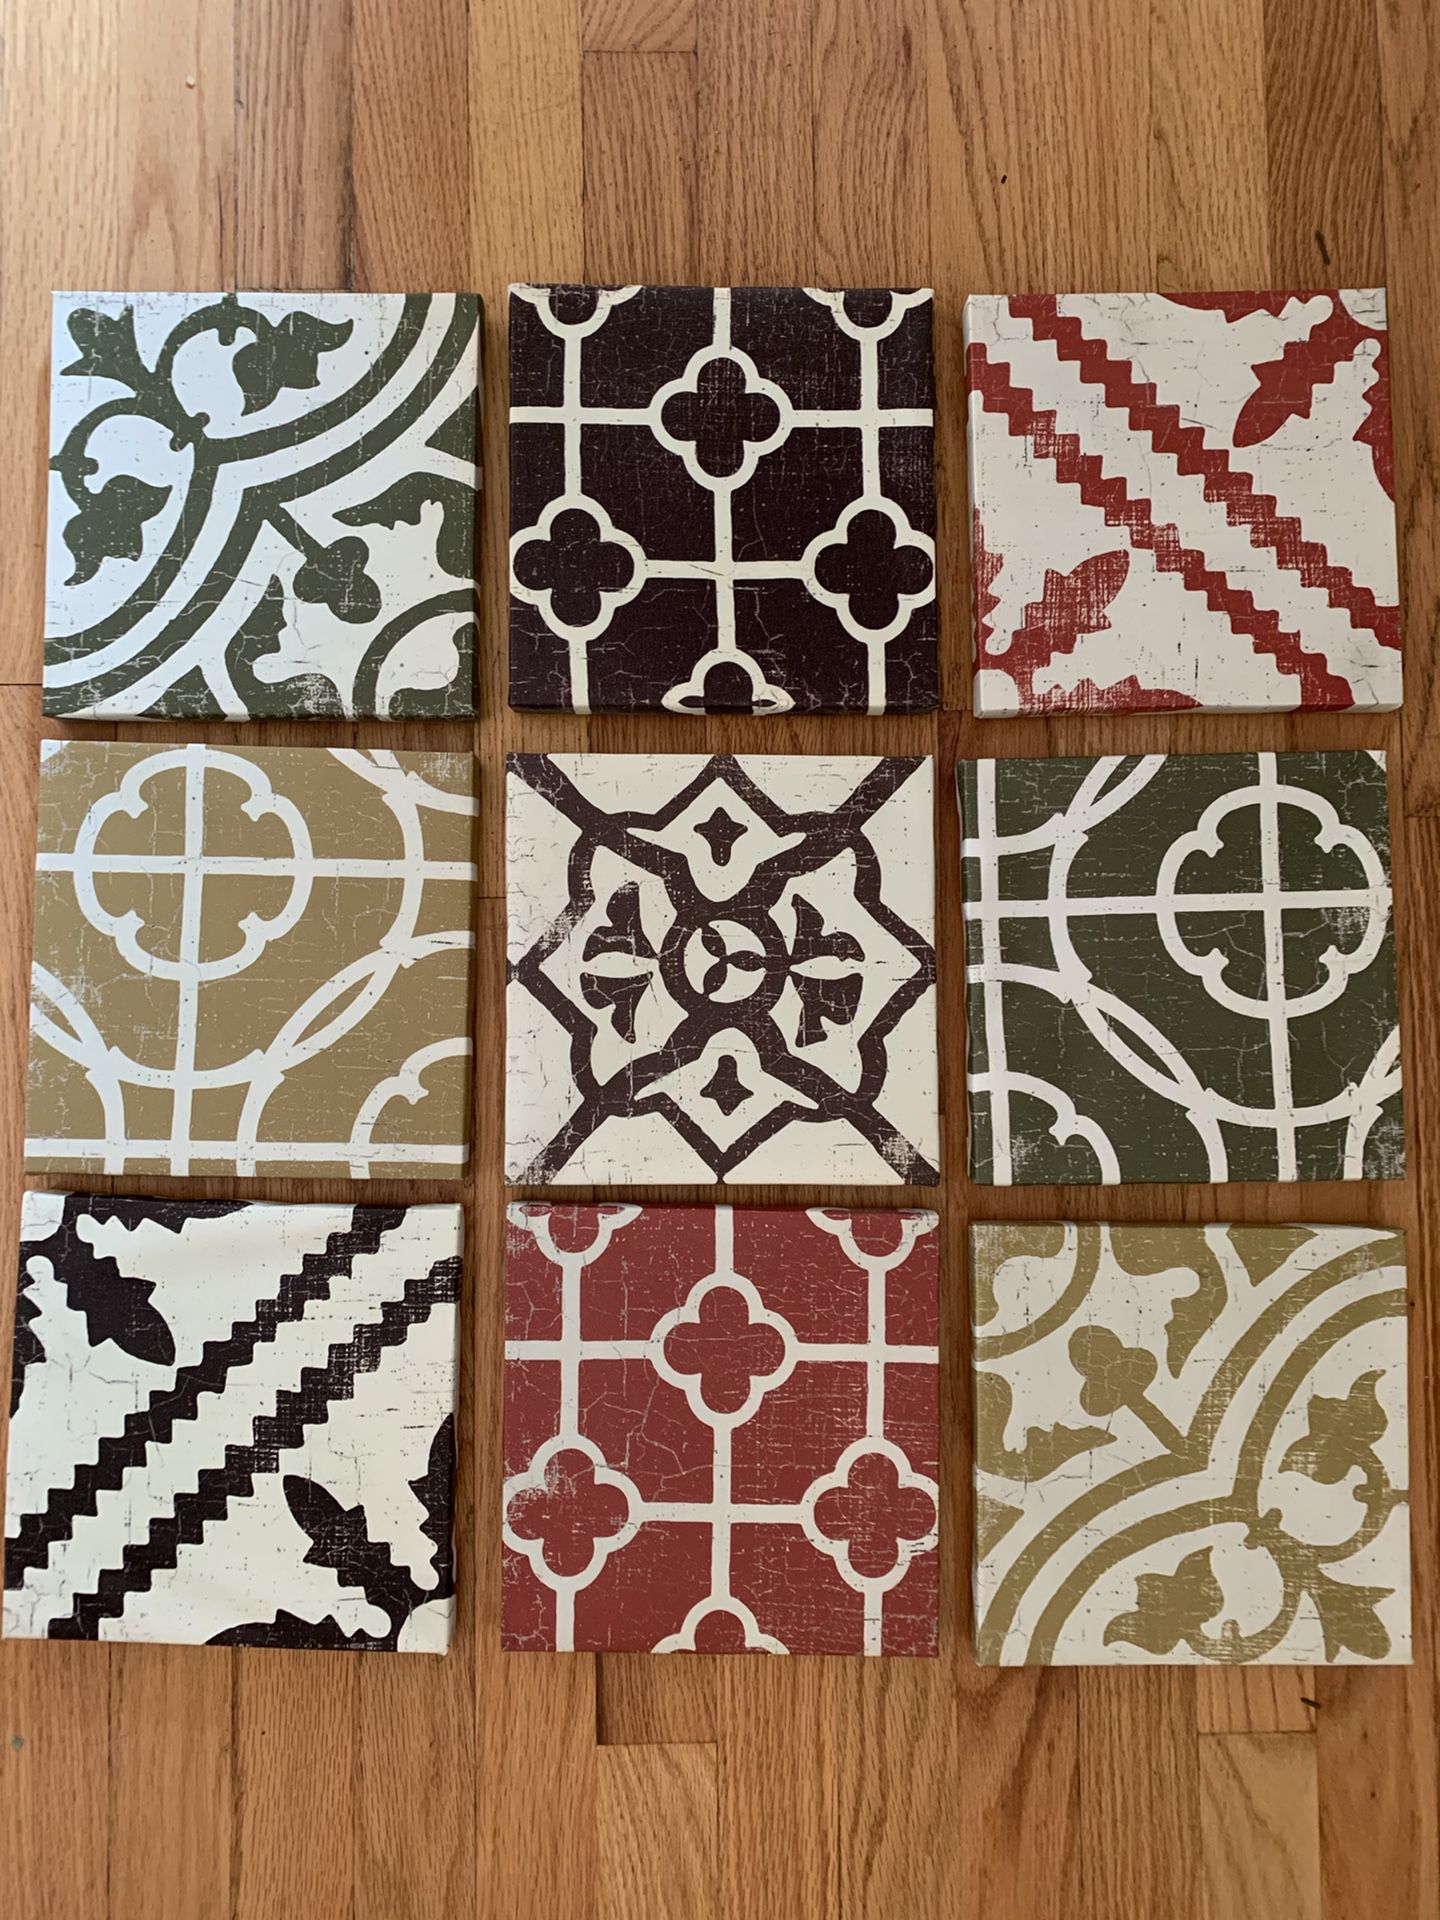 Home decor tiles from Cost Plus